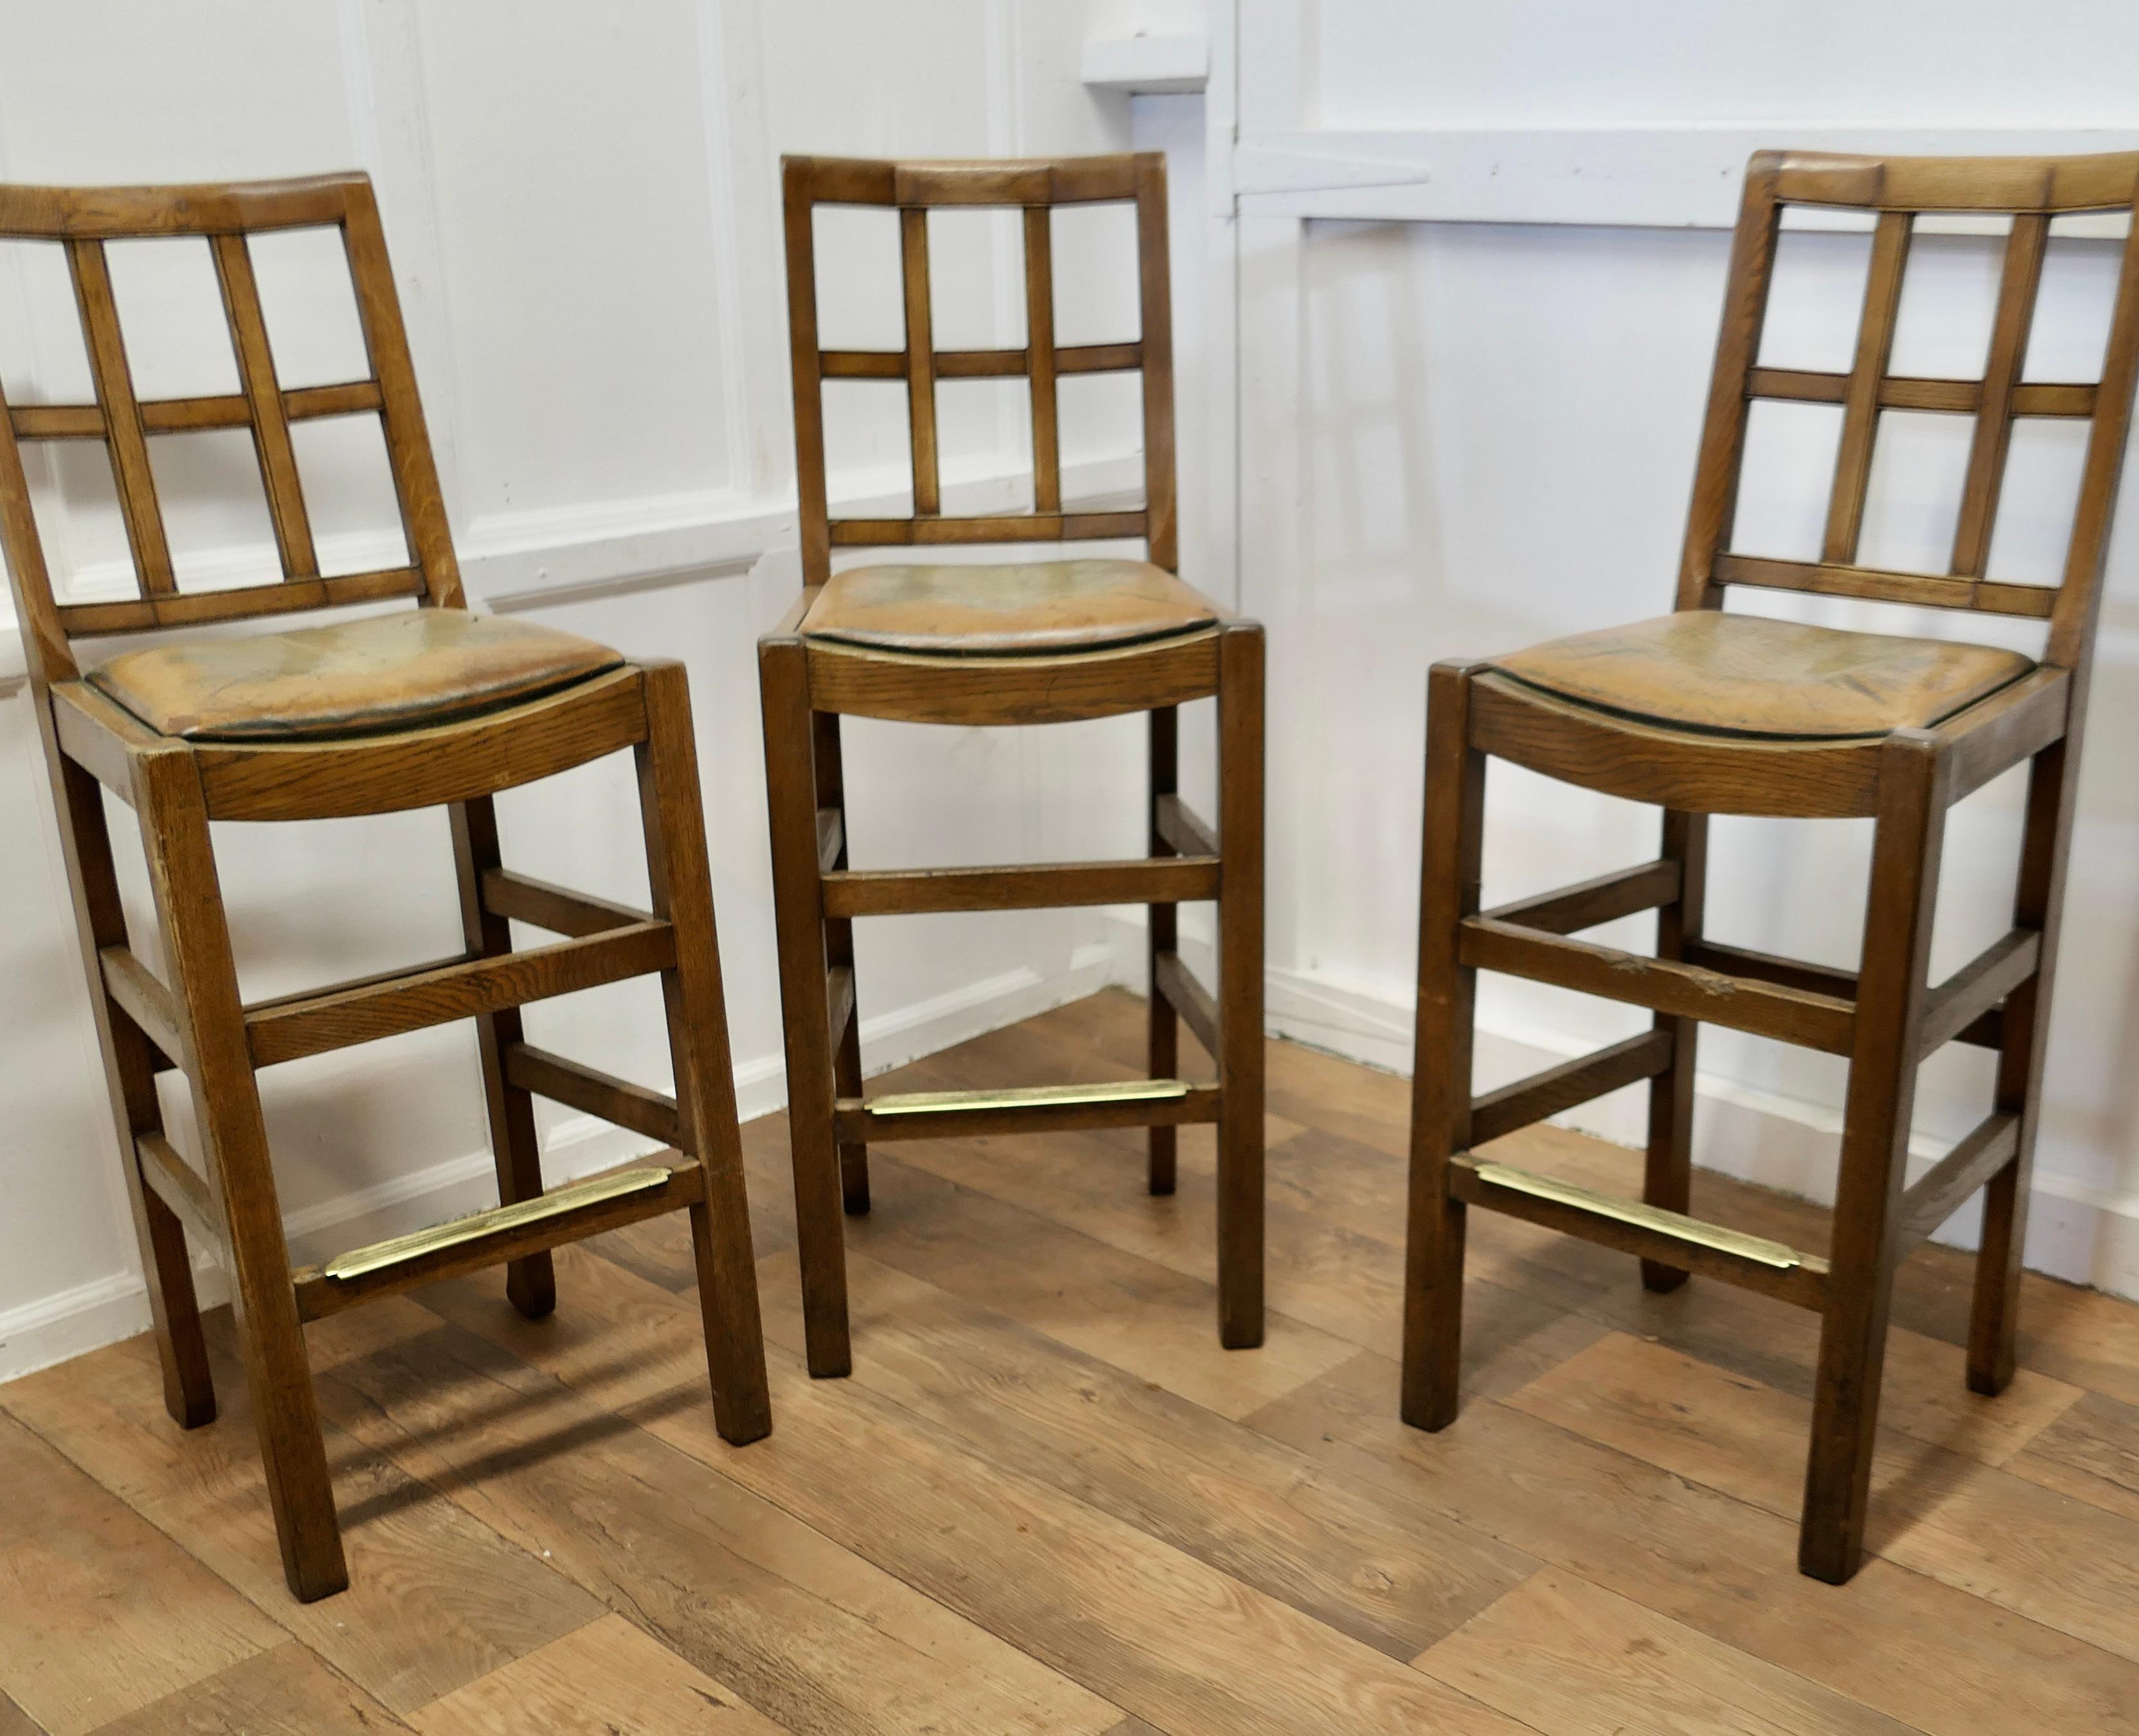 A Rare Trio of Arts and Crafts High Bar Stools, in Golden Oak

A trio of early 20th century oak lattice back dining chairs, probably by Heals, the chairs are in Golden Oak. The chairs have the original Leather seats, now showing a bit of age worn